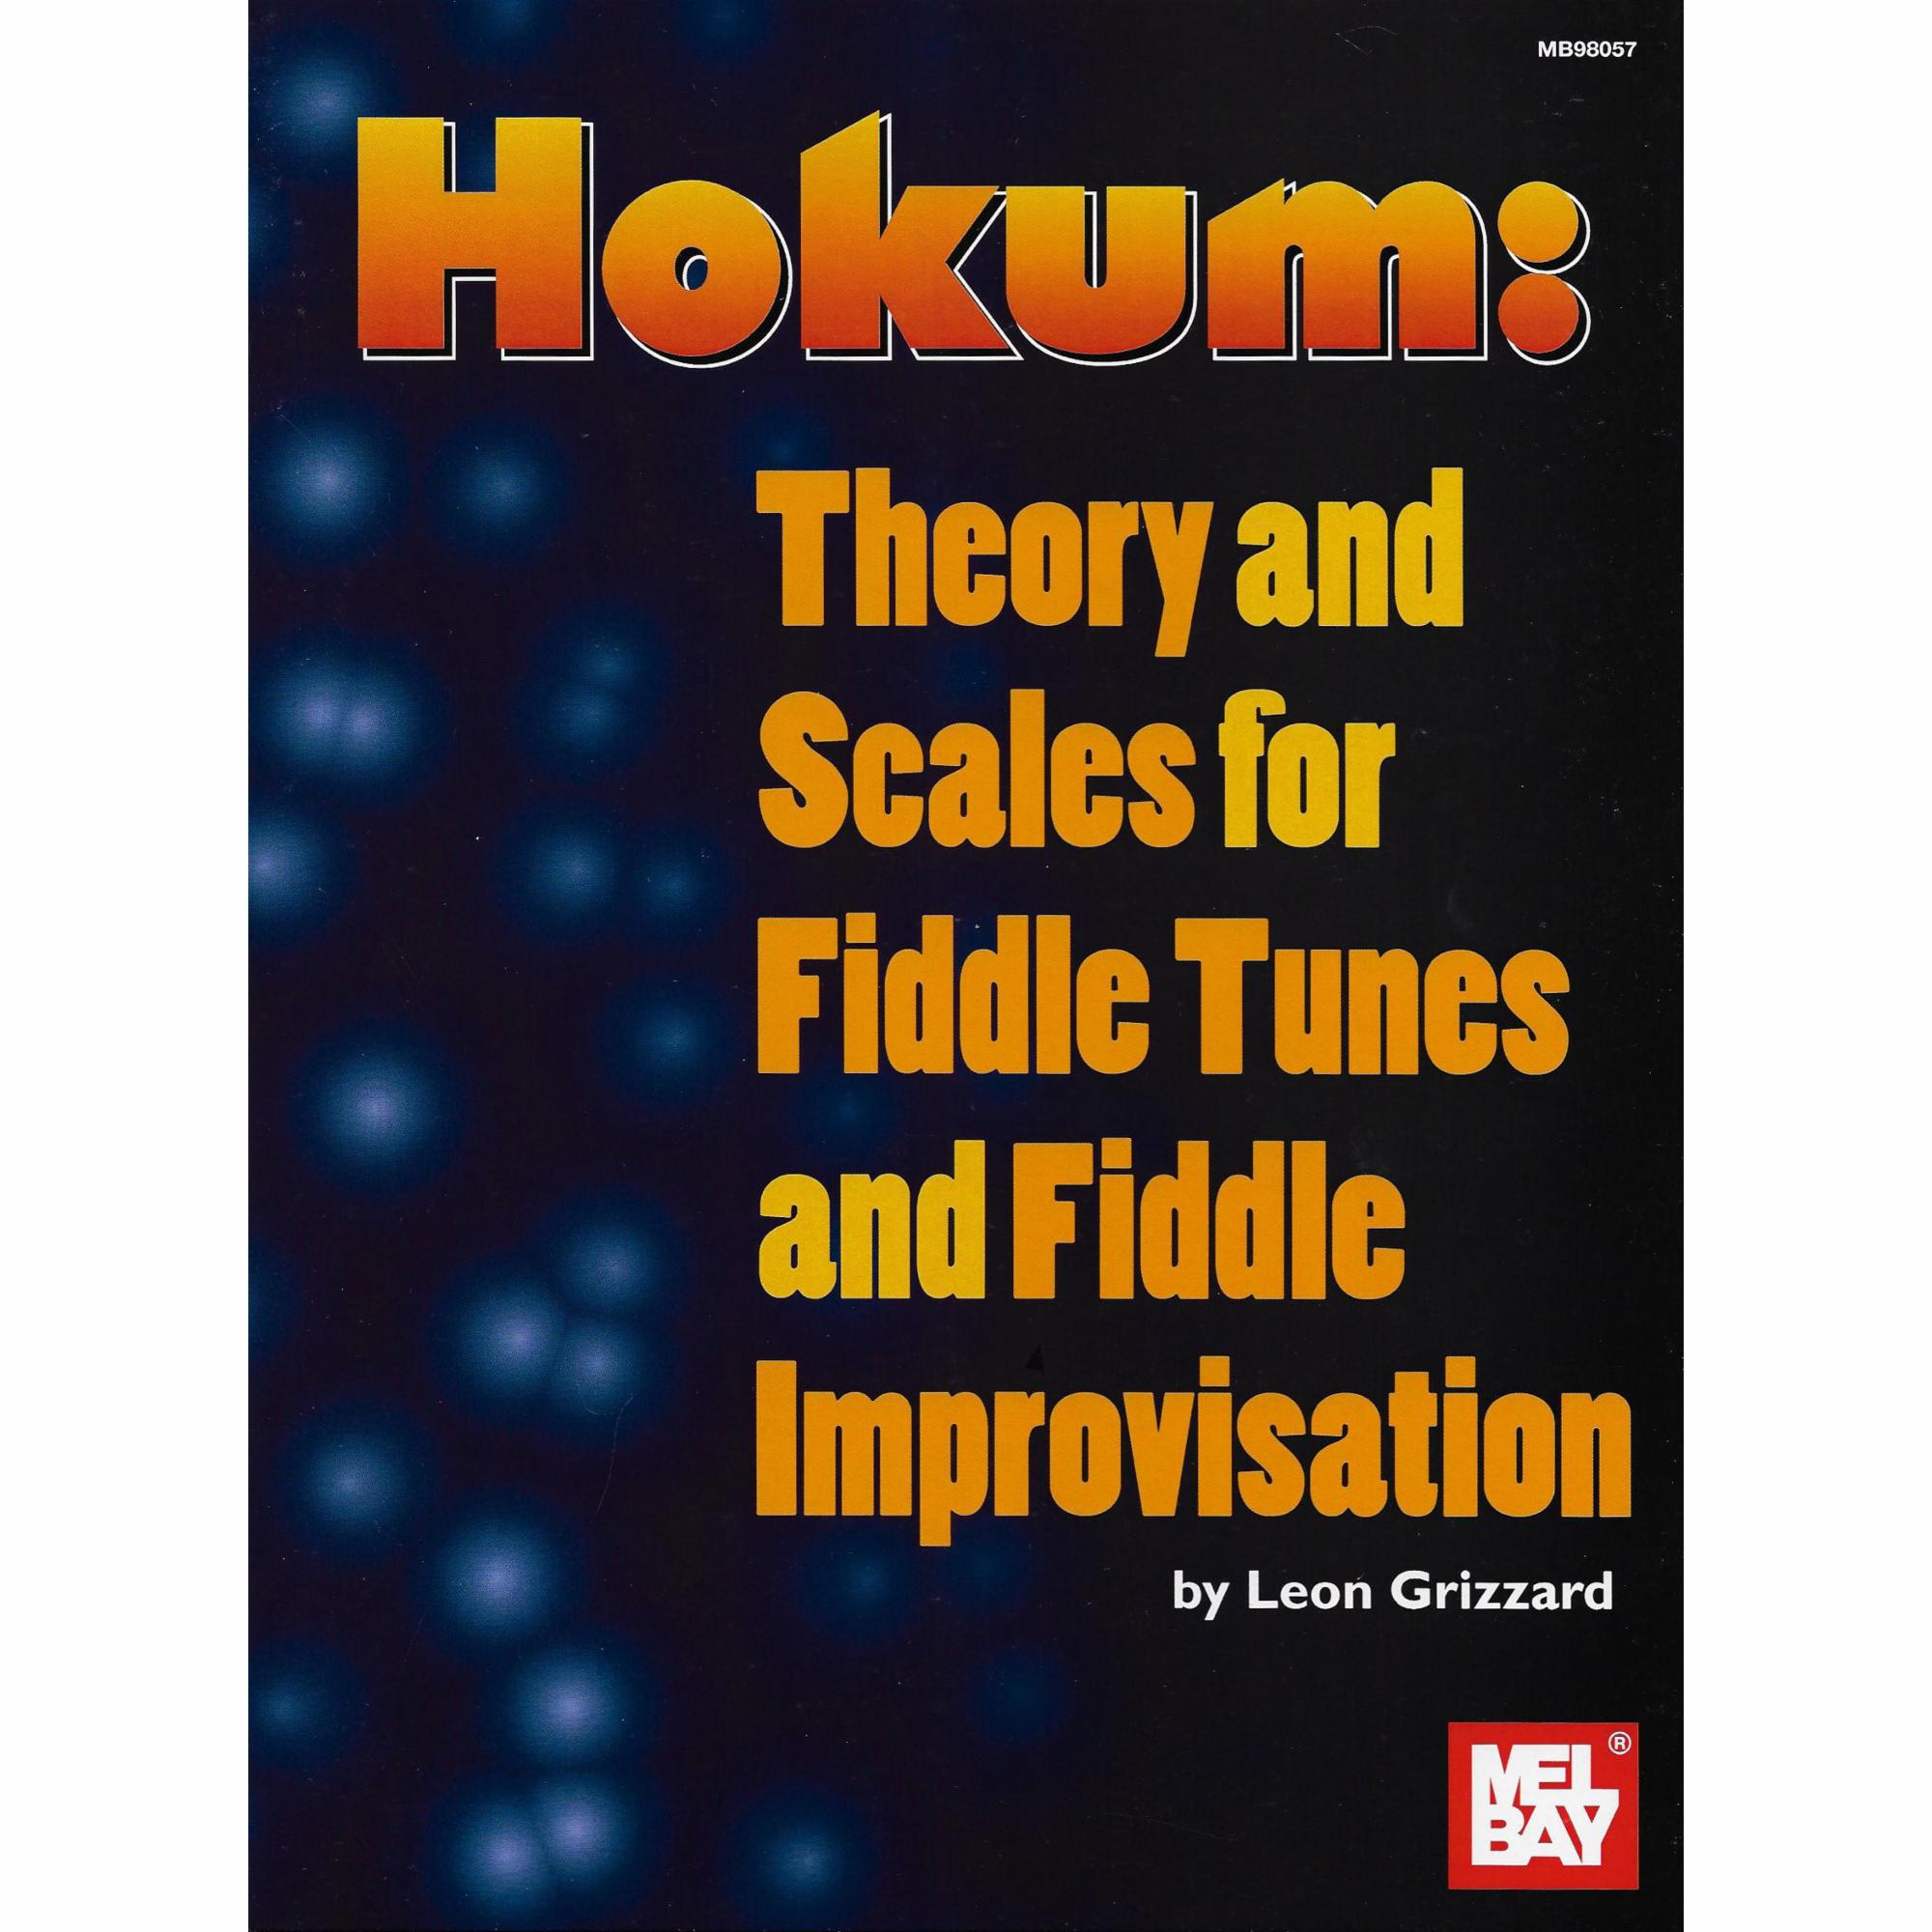 Hokum: Theory and Scales for Fiddle Tunes and Fiddle Improvisation